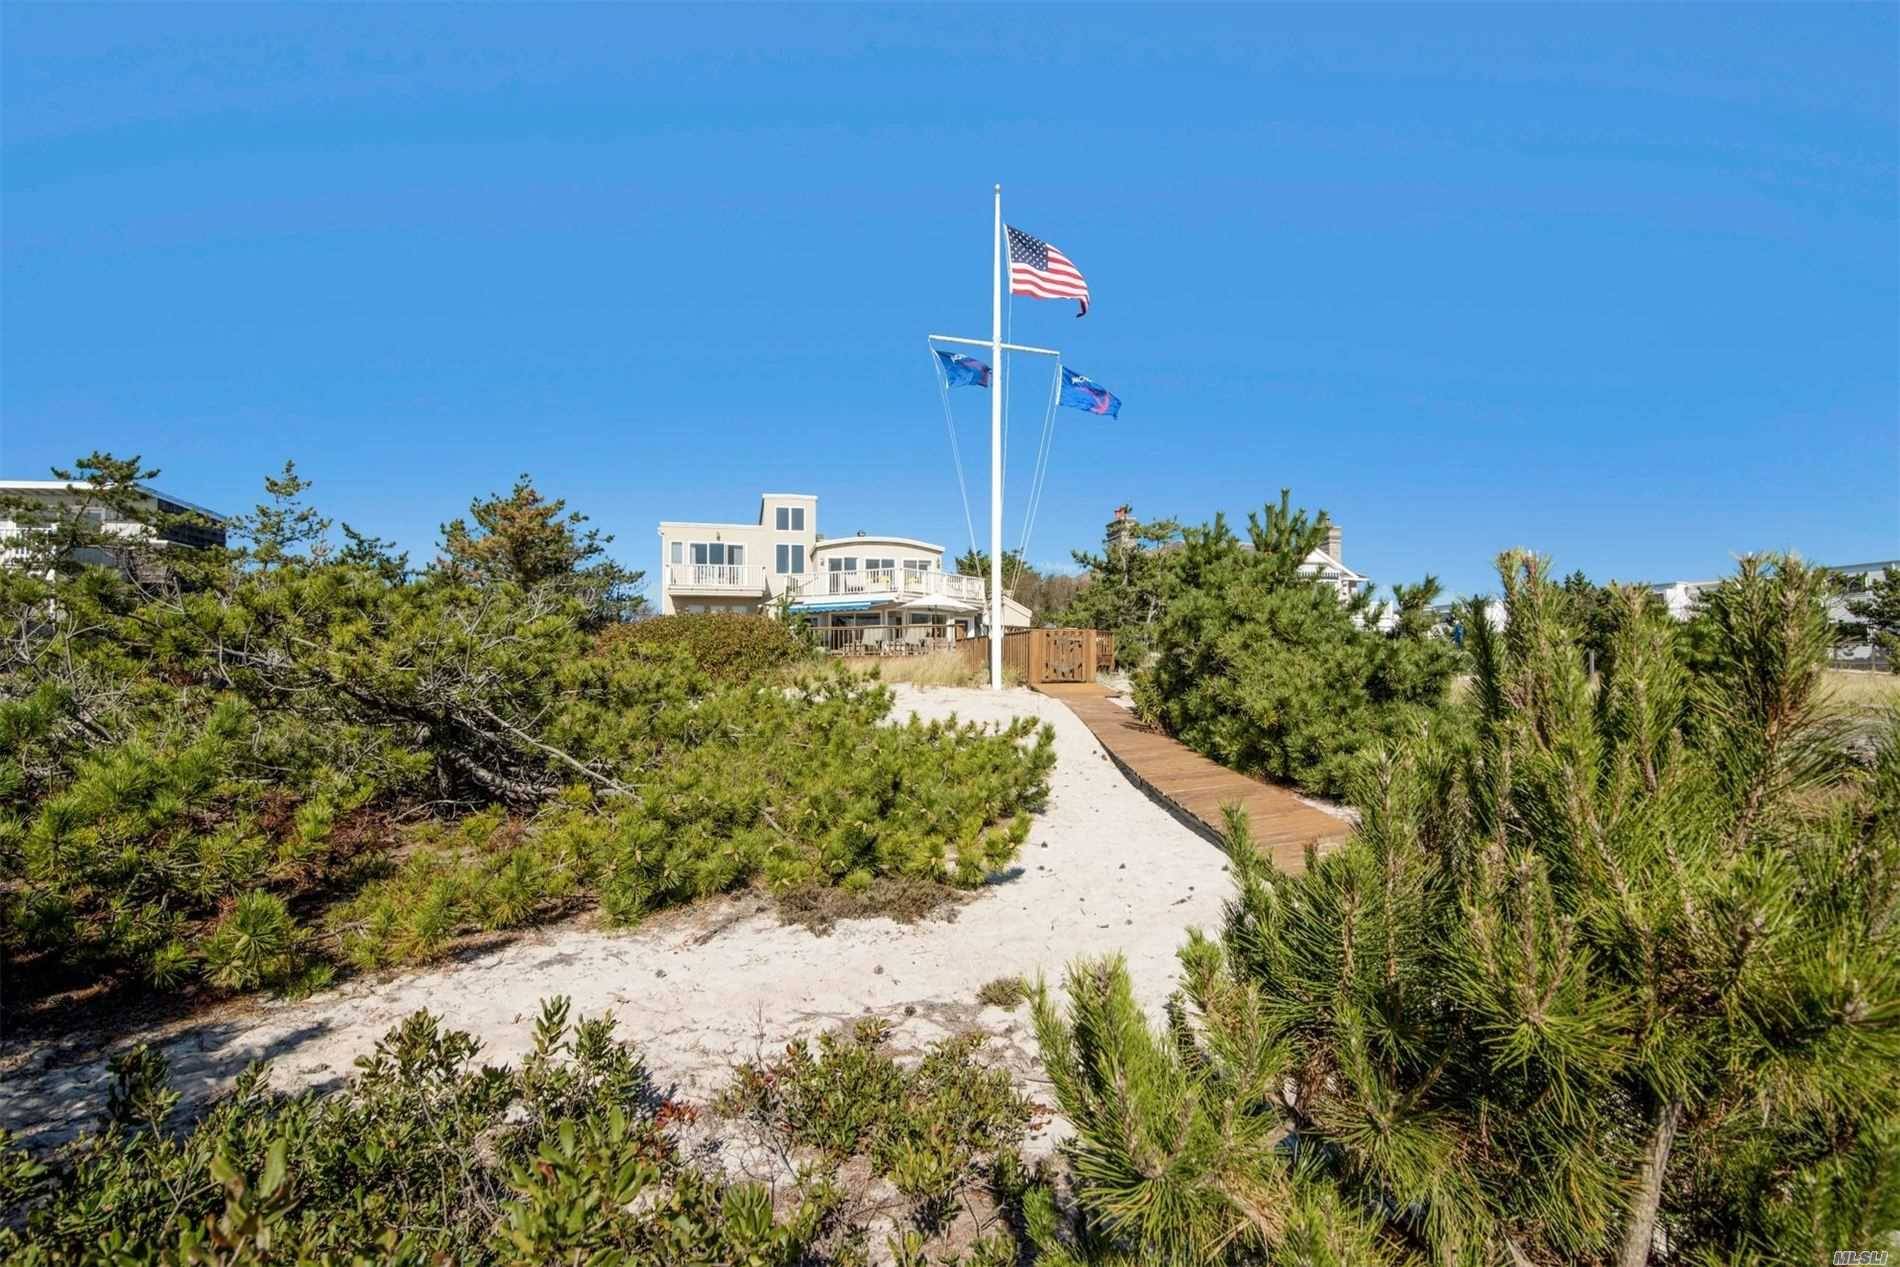 Majestically Situated On Protected Village Oceanfront, This Meticulously Maintained, Newly Renovated Home By Top Hamptons Builder Is Located Just A Short Distance From All Westhampton Beach Village Amenities.